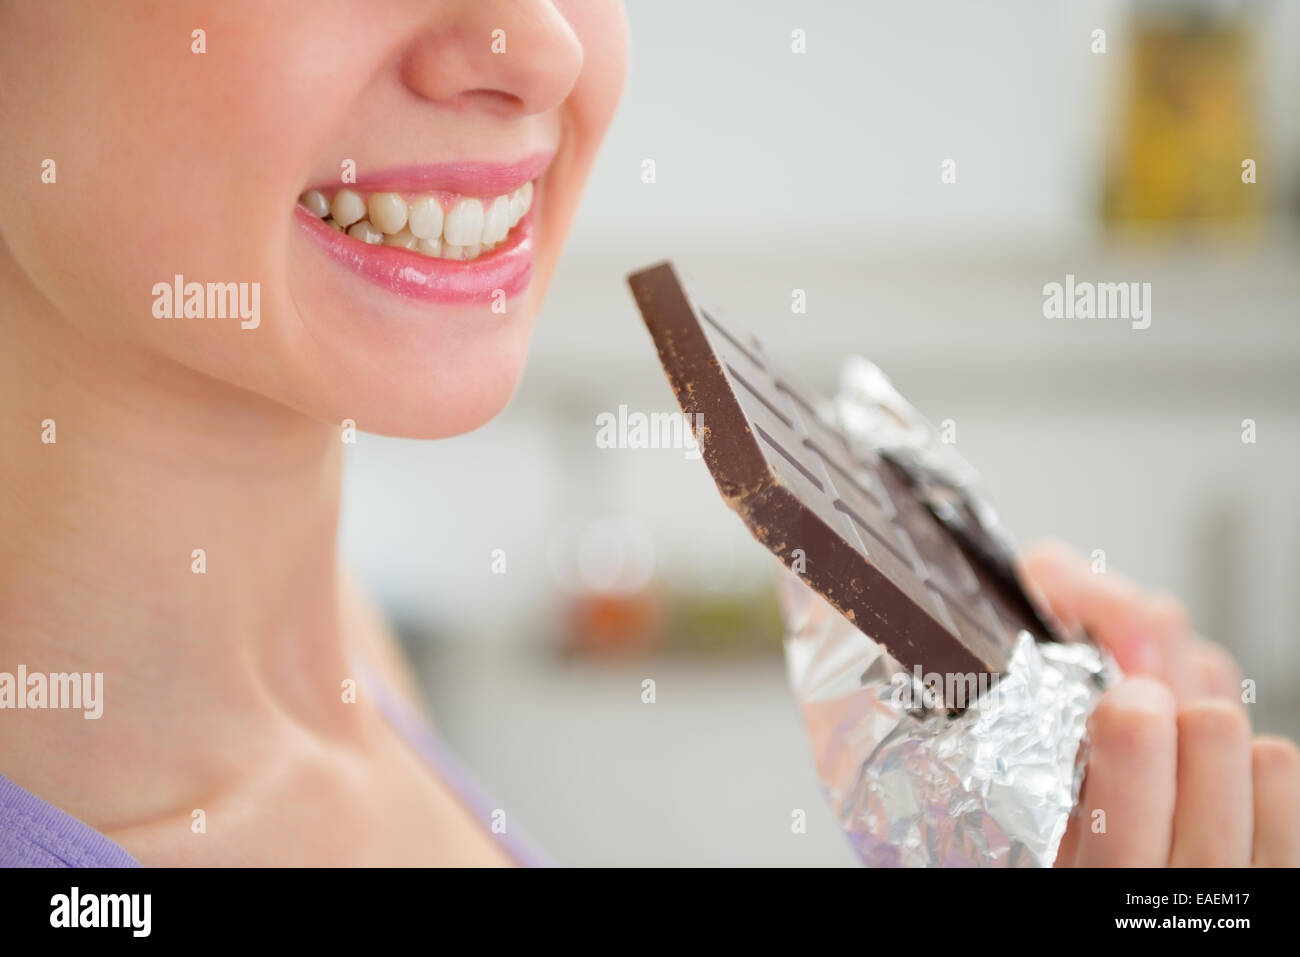 Closeup on happy young woman eating chocolate Stock Photo